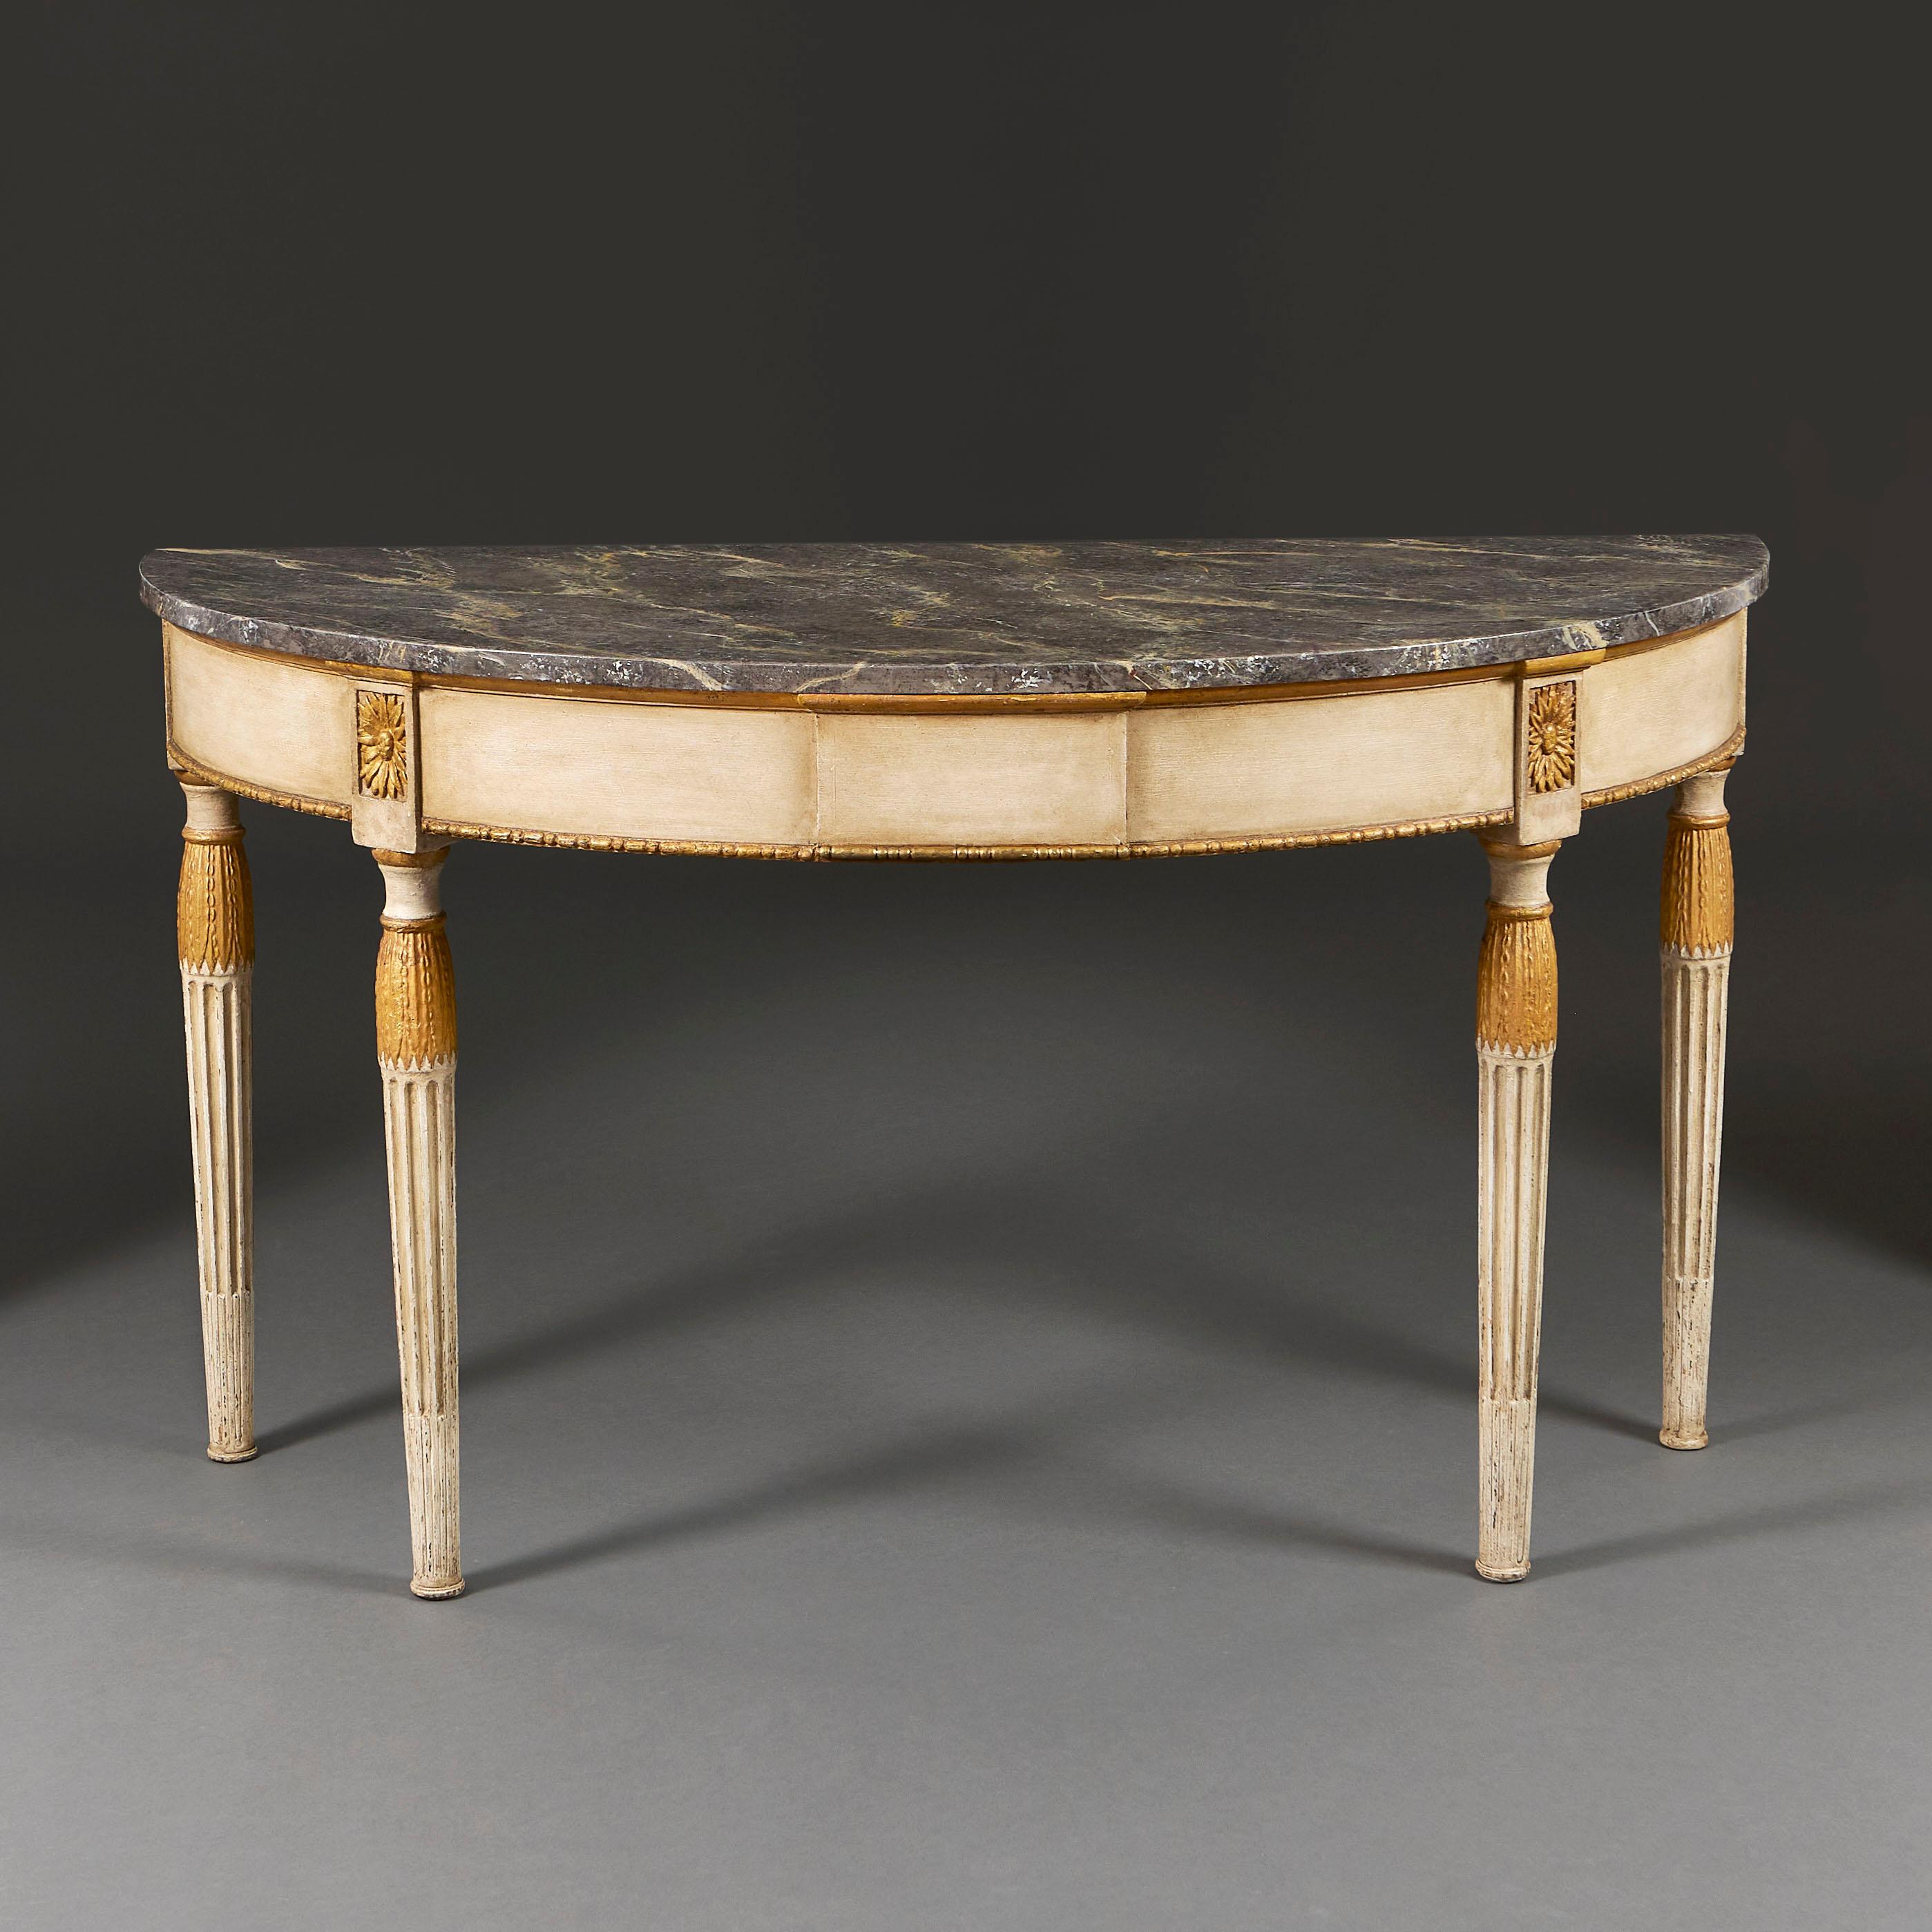 Baltic, circa 1820

An early nineteenth century Baltic pier table, with painted white frieze, inset gilded paterae and mouldings throughout, supported on four fluted legs decorated with stylised acanthus, the top painted to simulate a grey veined